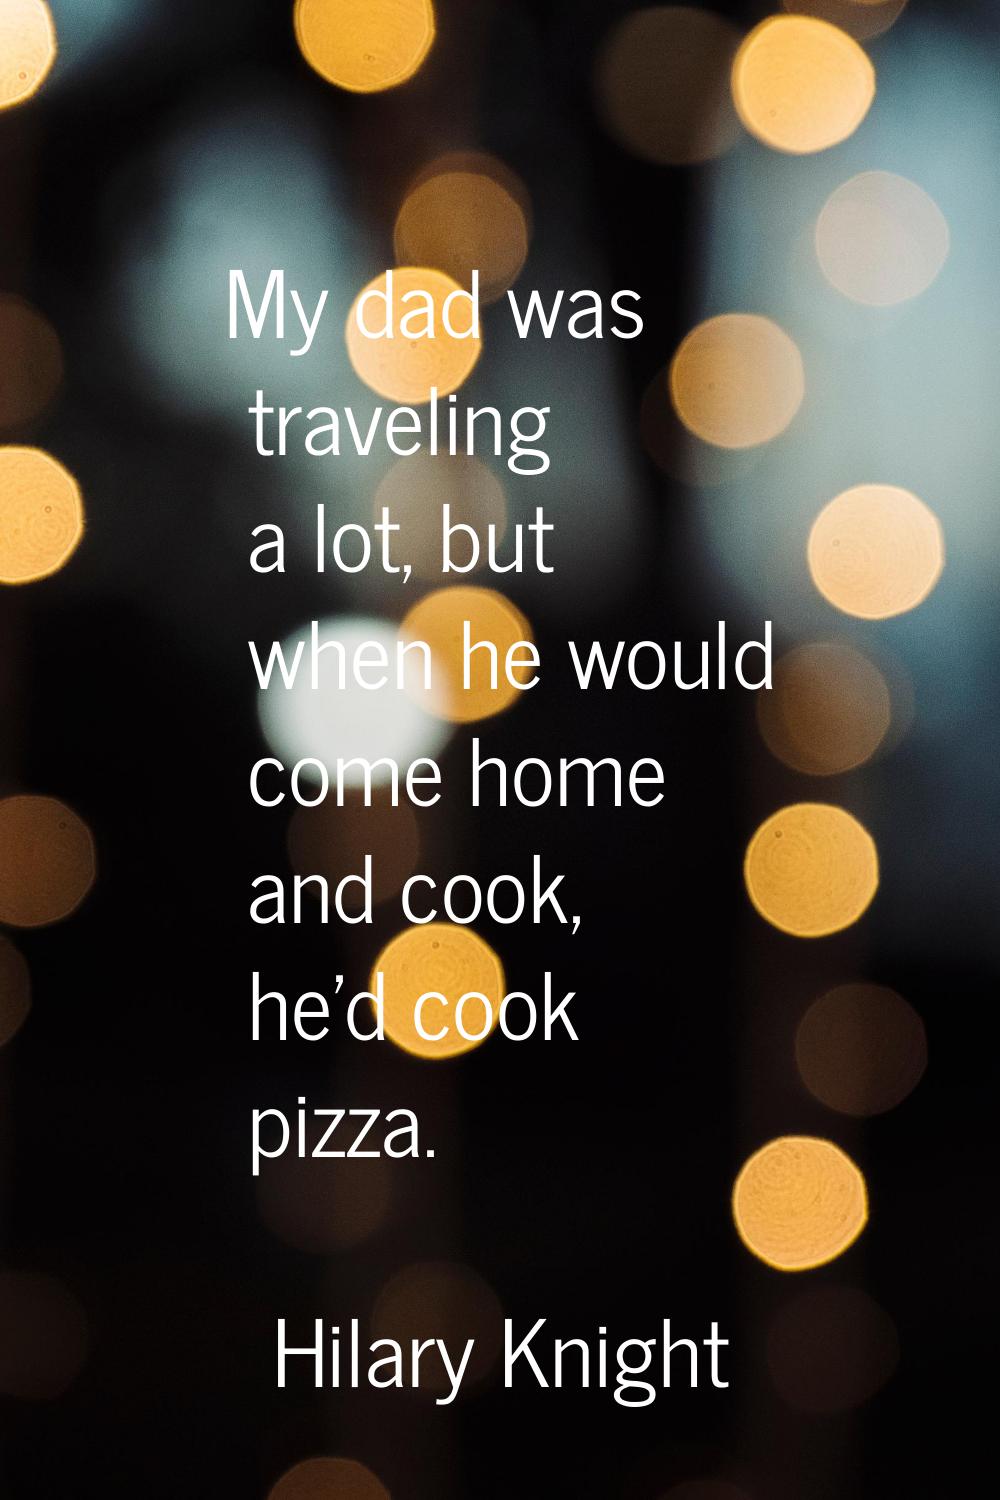 My dad was traveling a lot, but when he would come home and cook, he'd cook pizza.